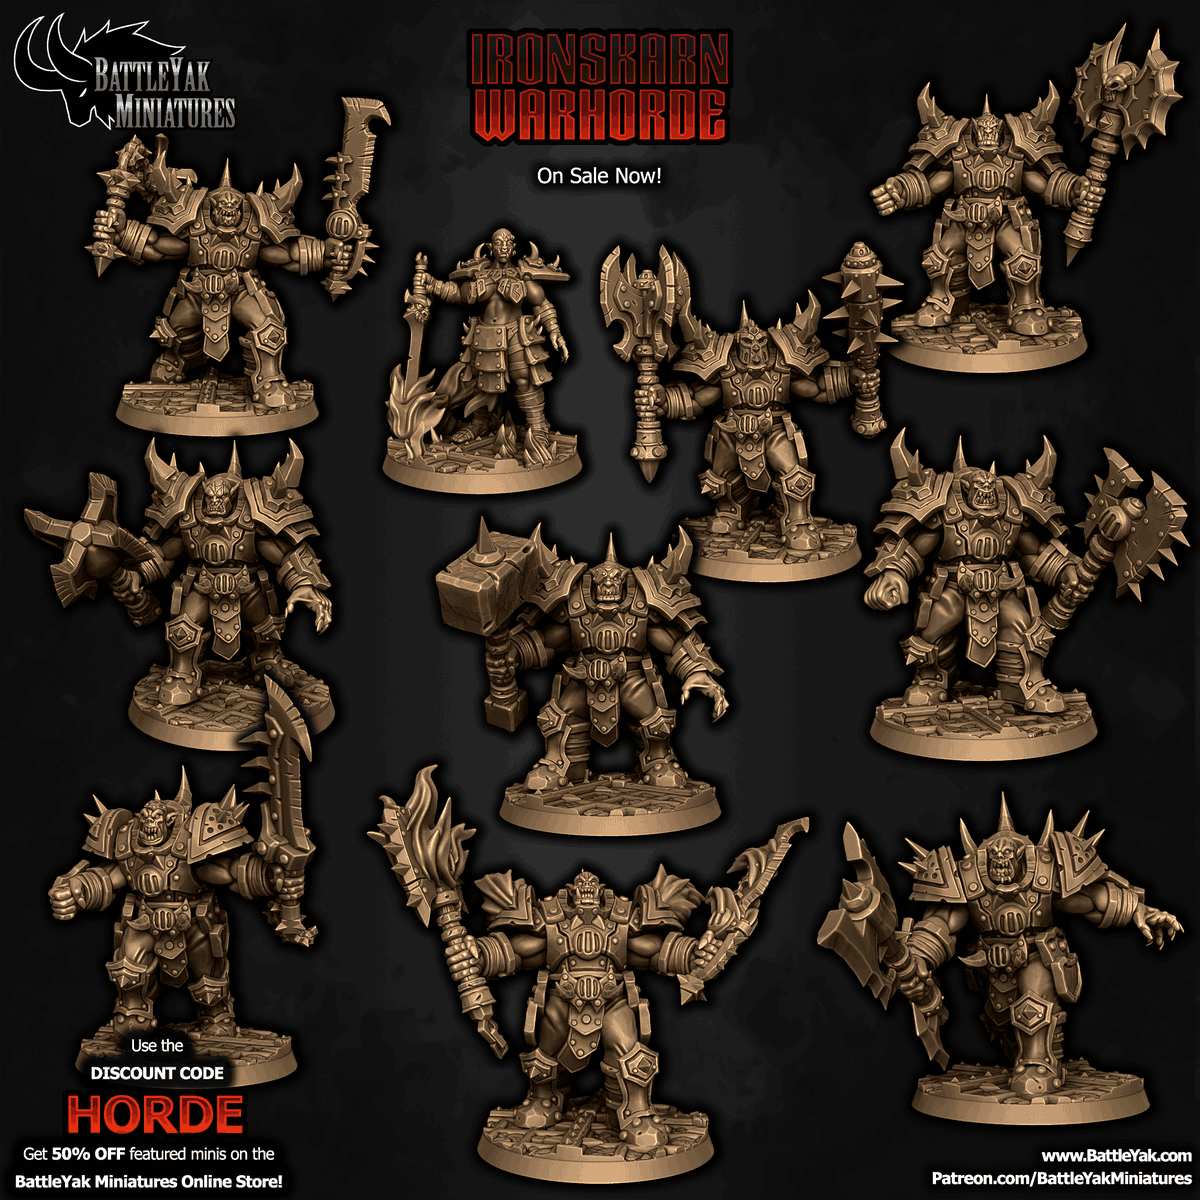 The latest sale from Battle Yak Miniatures is available now! battleyak.com #3dprinting #tabletopgaming #warcraft #conceptart #orc #dnd #wargaming